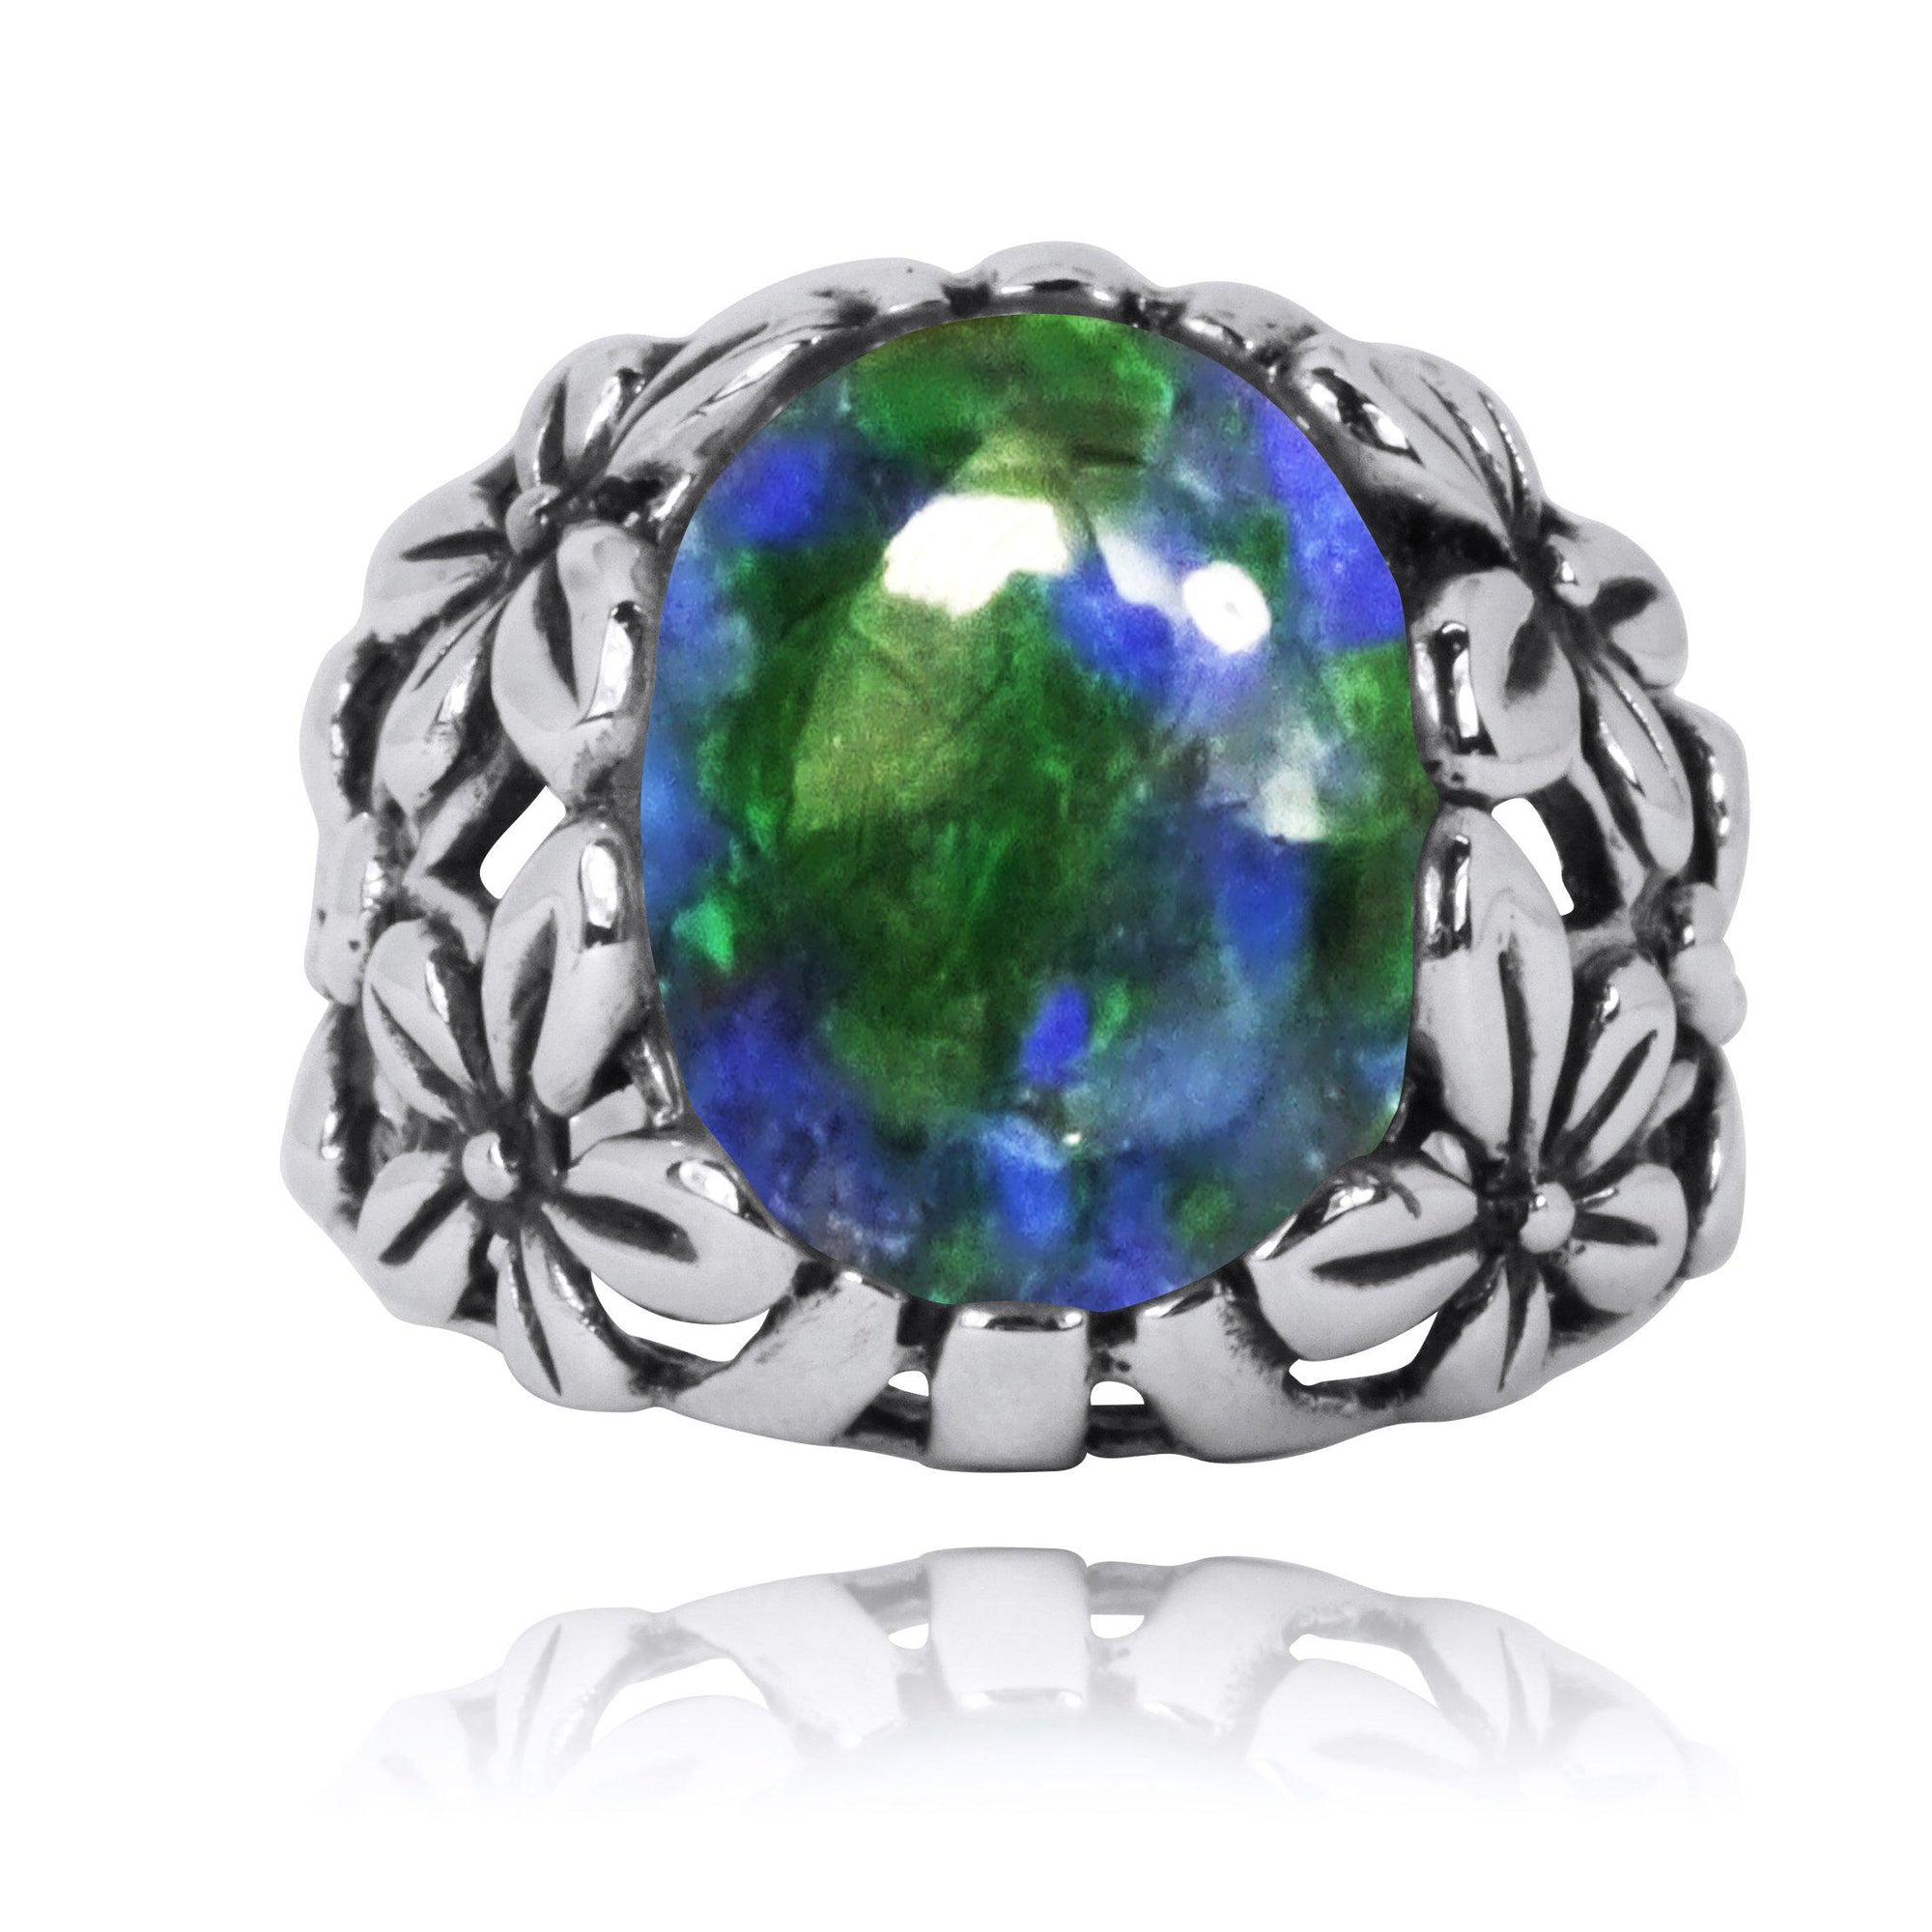 Oxidized Silver Floral Ring with Azurite Malachite